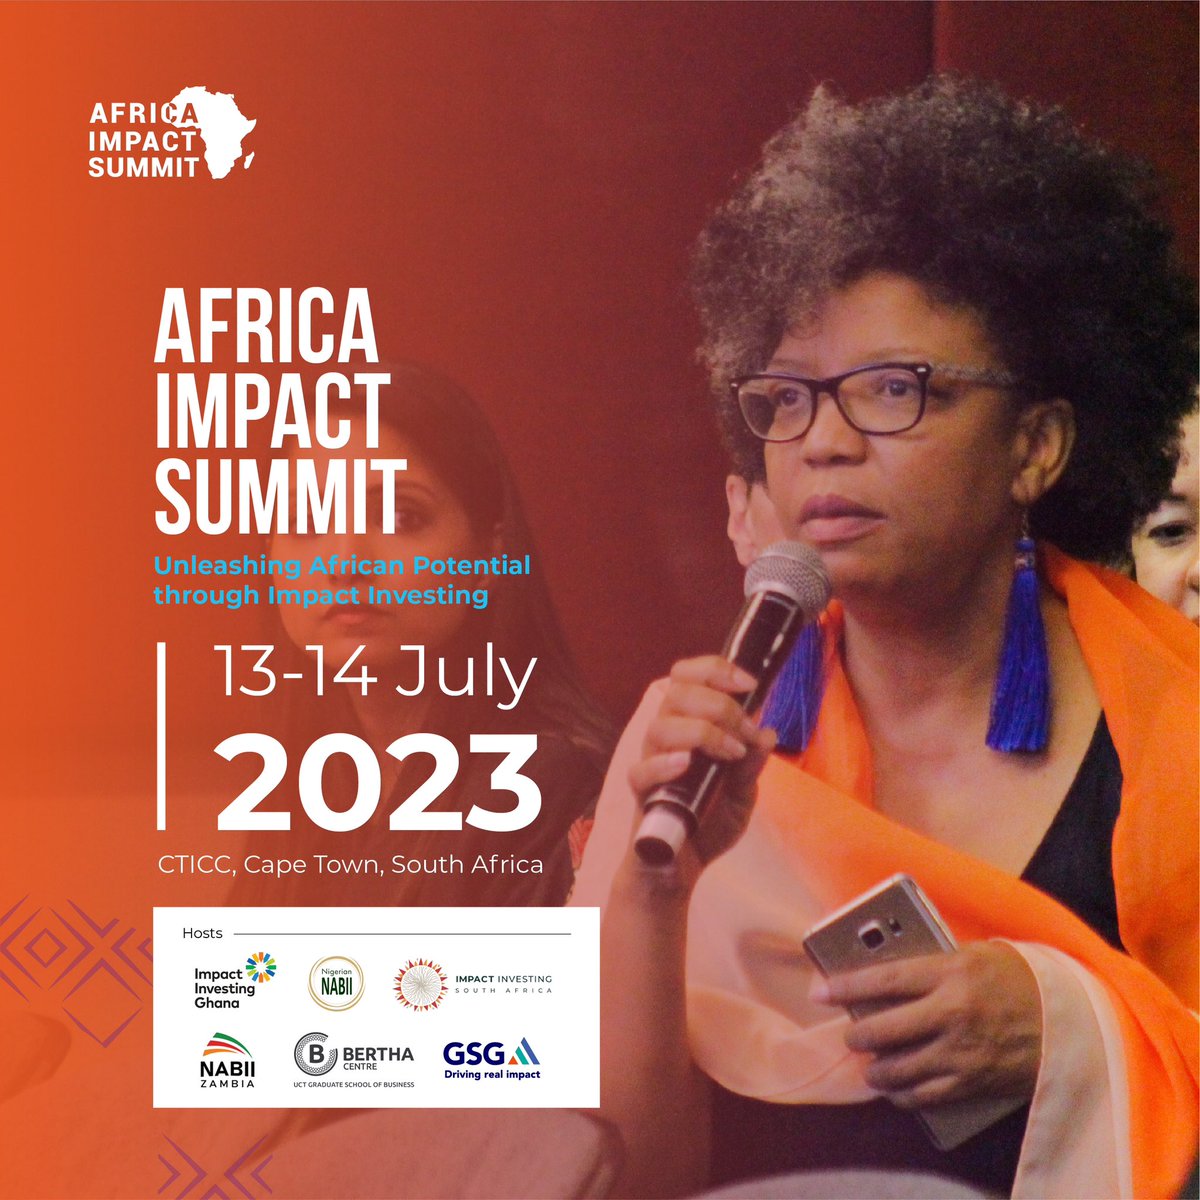 Glad to huddle w institutions, investors, businesses & solution providers at the inaugural #AfricaImpactSummit building the impact capital market in Africa.   Increasing & bending capital flows towards #SDGs is indispensable & urgent to achieve #horizon2030.   #unleashAfrica